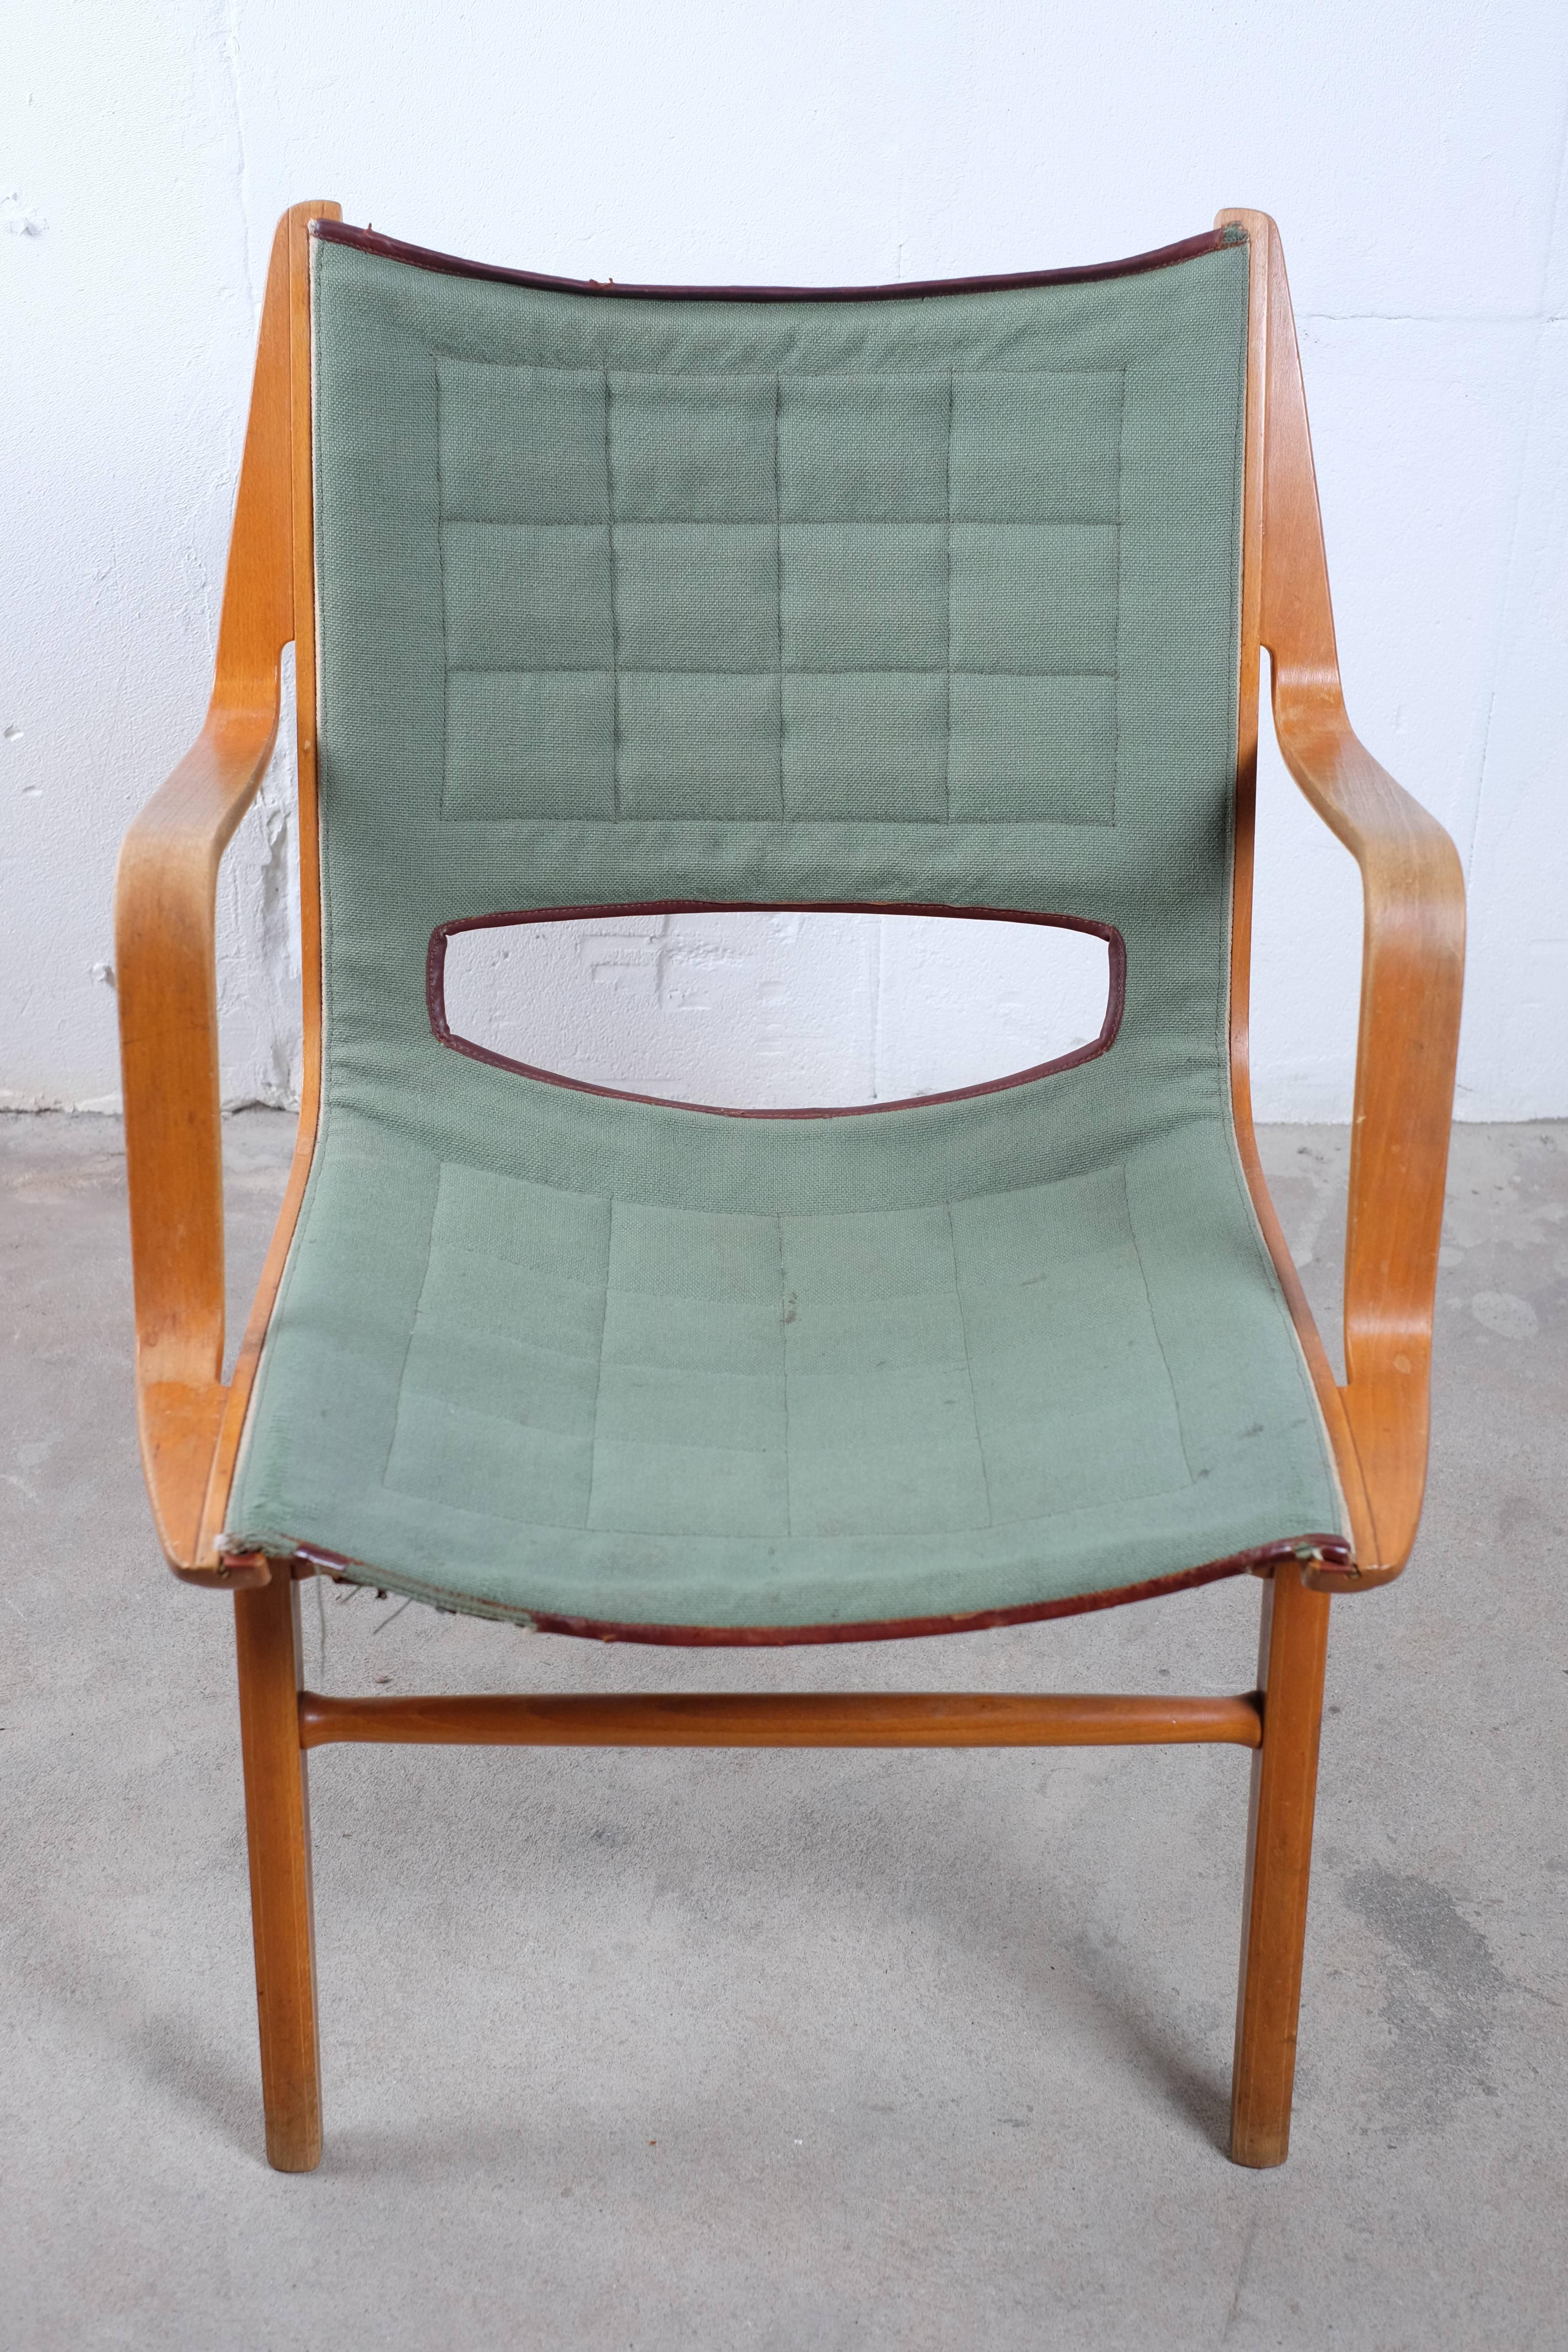 Peter Hvidt and Orla Mølgaard-Nielsen AX chair with light green canvas - designed 1949 for Fritz Hansen

The AX chair by Peter Hvidt and Orla Mølgaard-Nielsen was first manufactured in 1950 by Fritz Hansen and was constructed using Hansen's